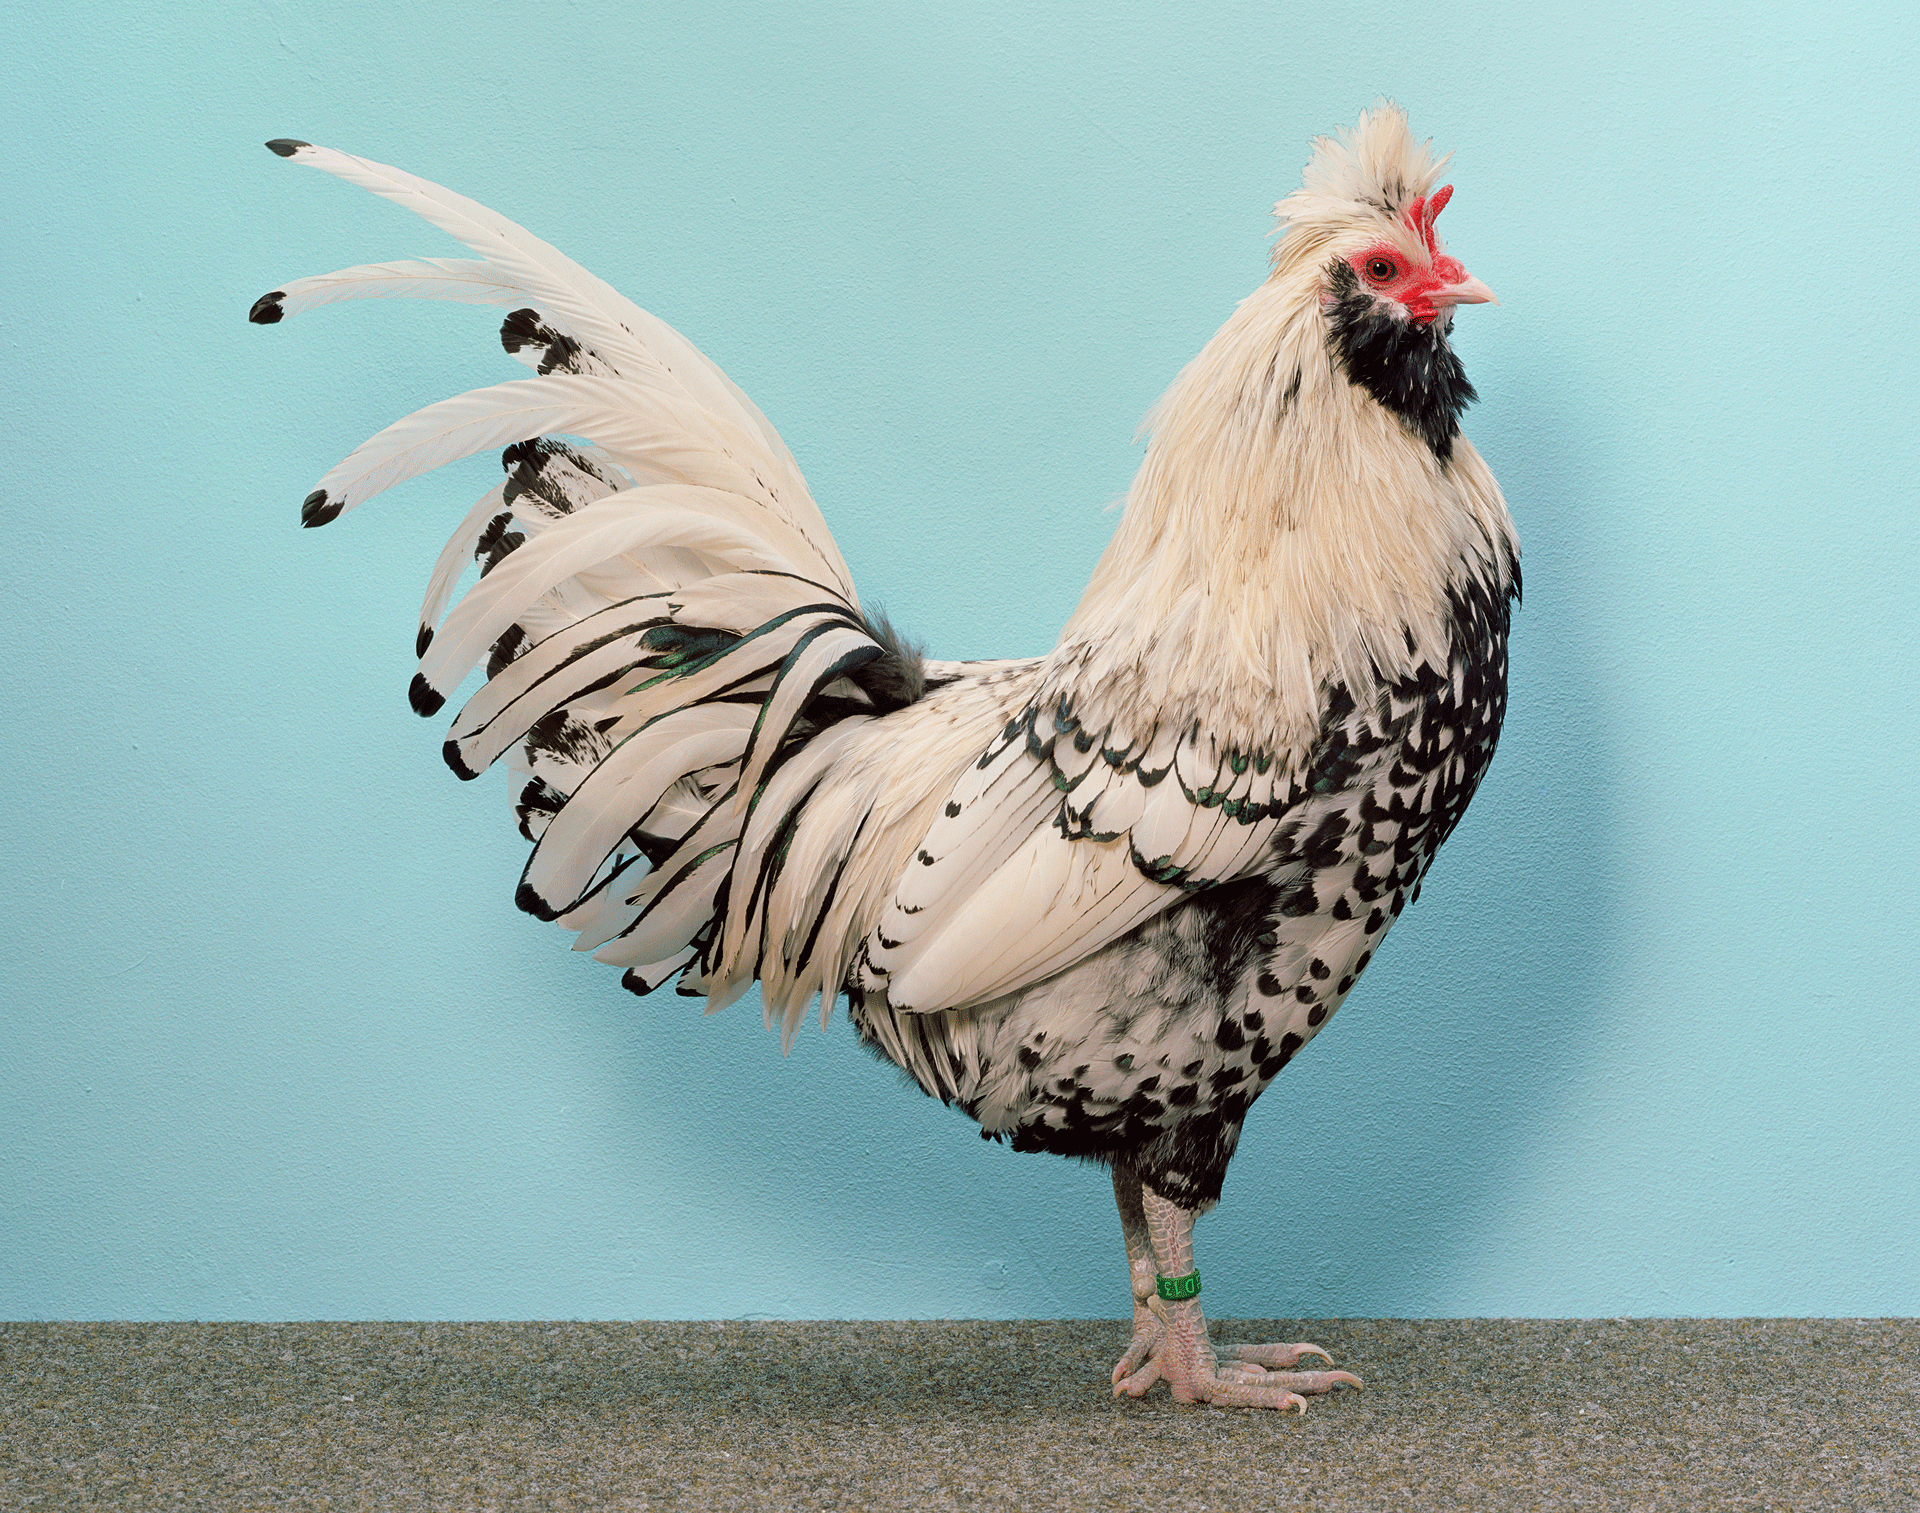 A photograph of an Appenzeller chicken by Christopher Williams, titled Standardpose [Standard Pose]‚Ä¶, dated 2013.